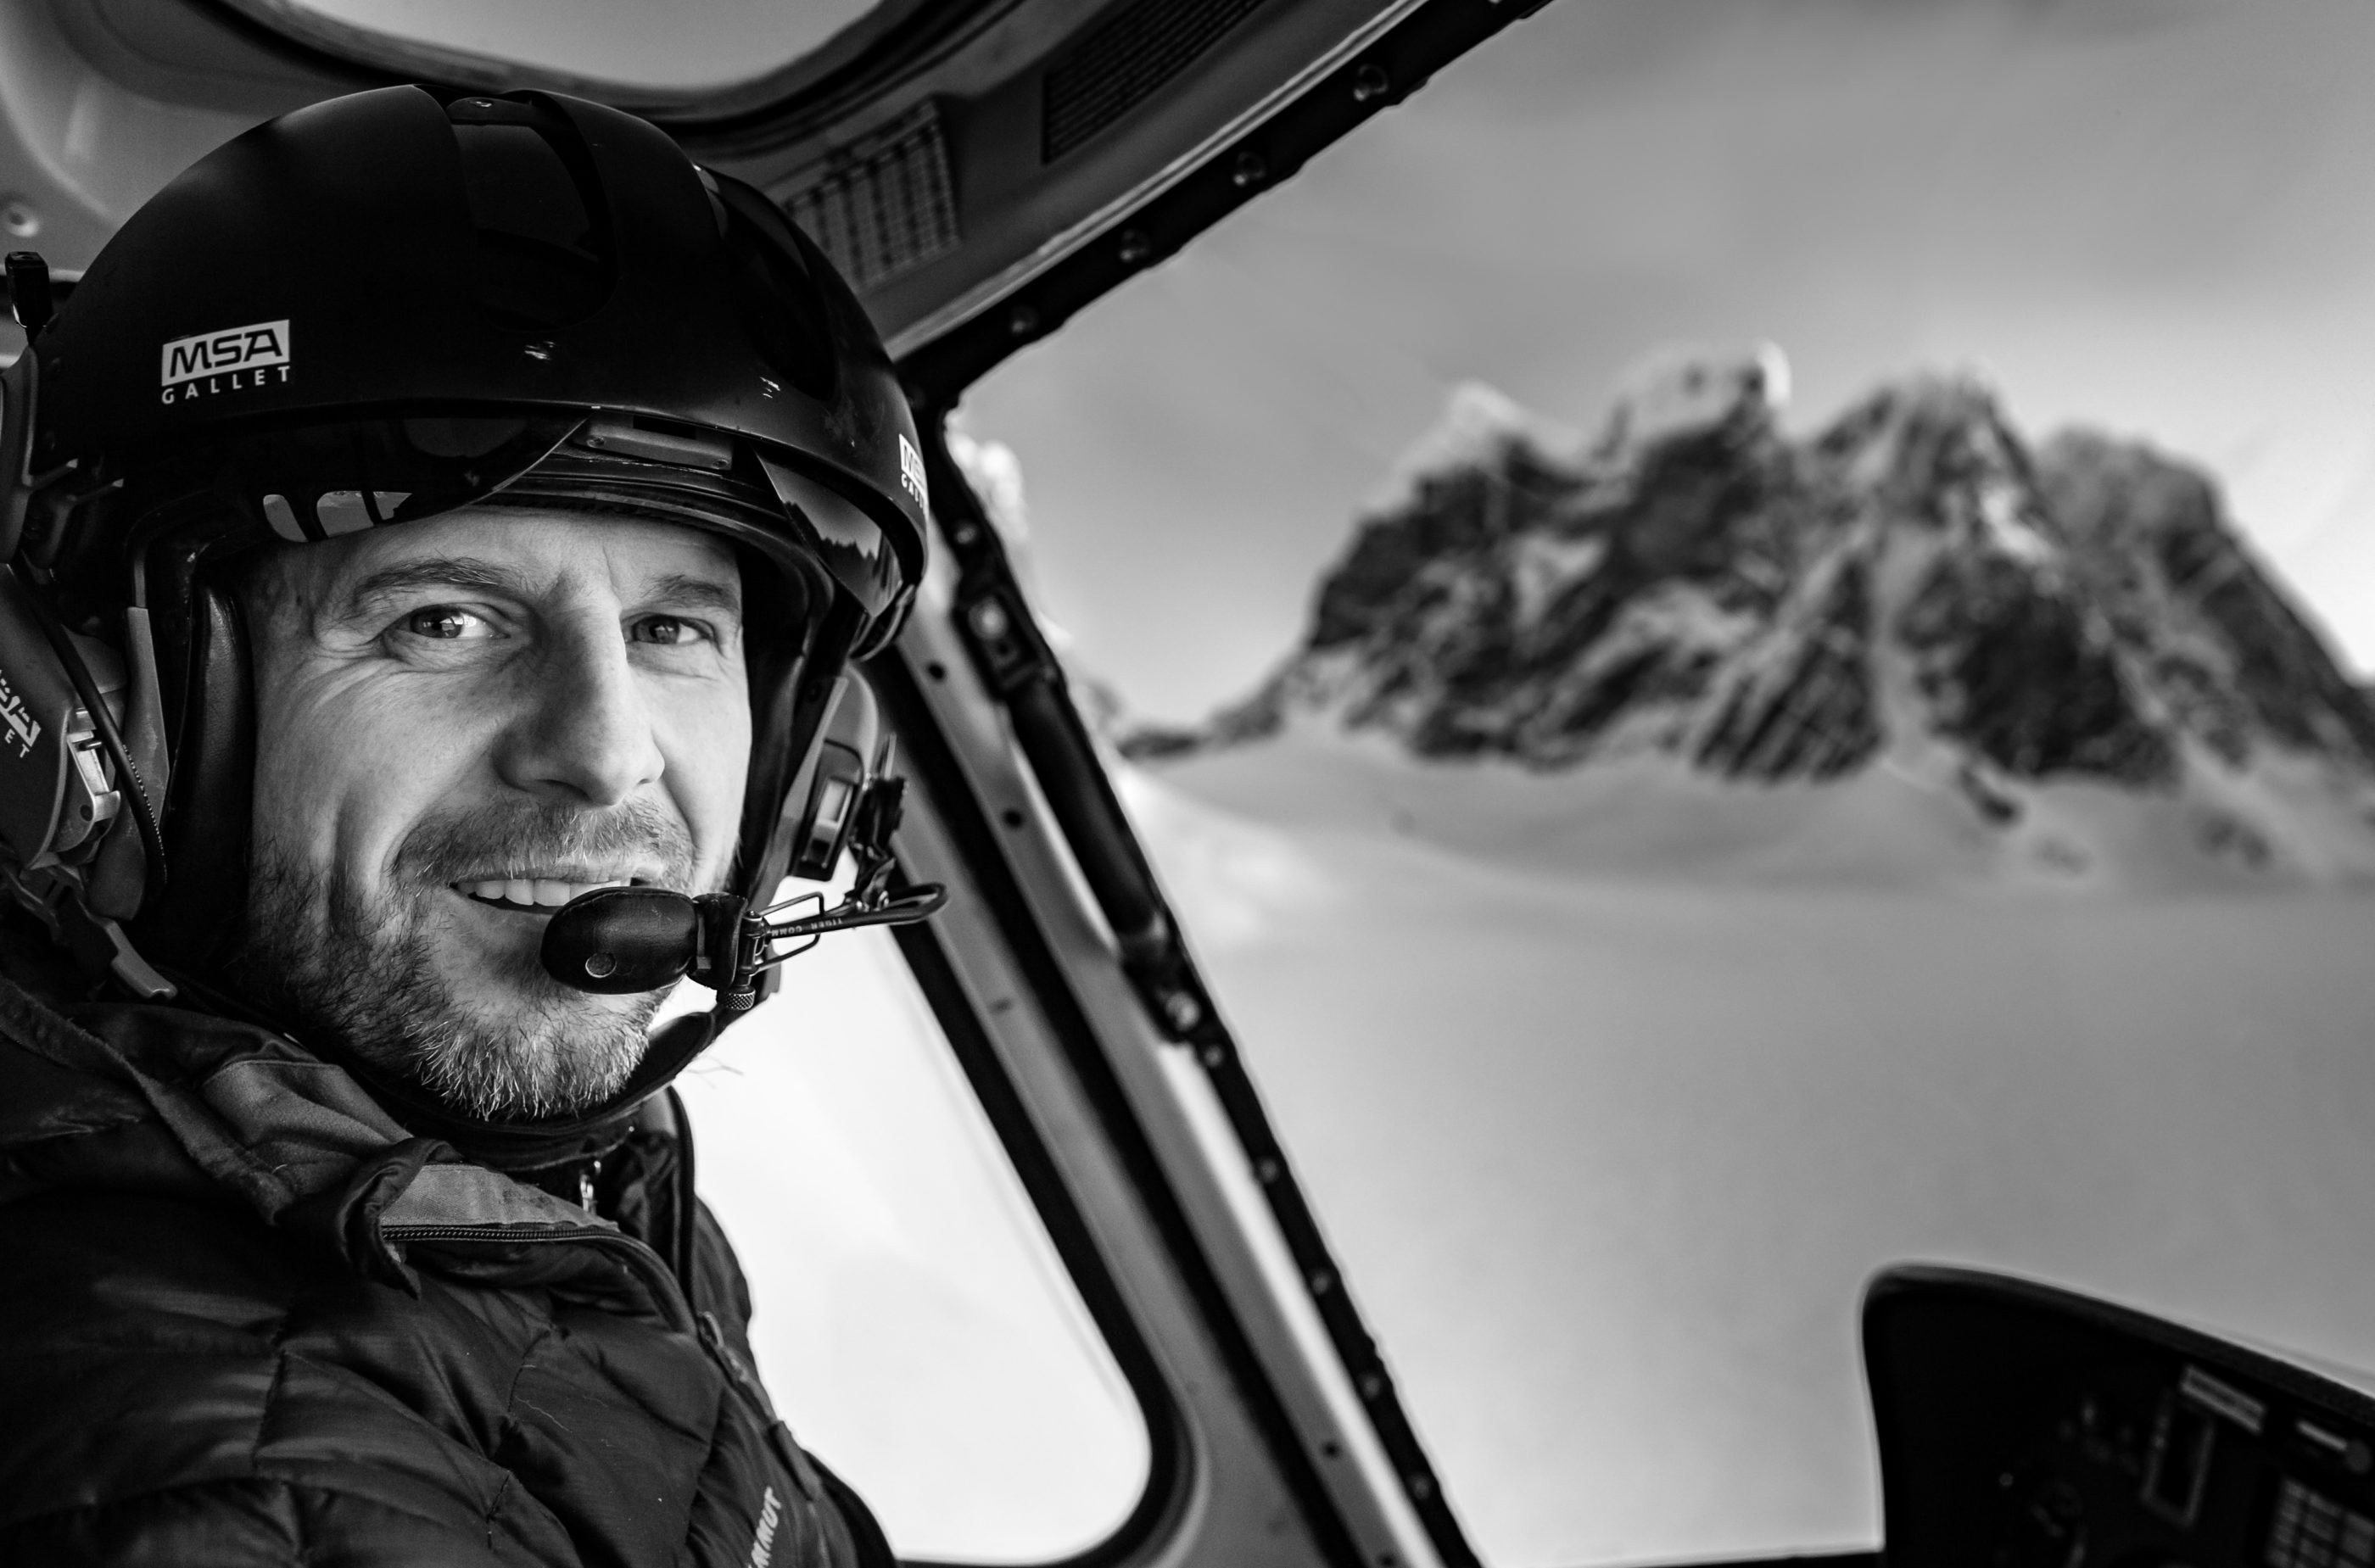 After immigrating to the United States in 2000 and receiving flight training, Hermansky worked as a flight instructor in California before he was hired by Temsco to fly tours in Alaska. Temsco Photo